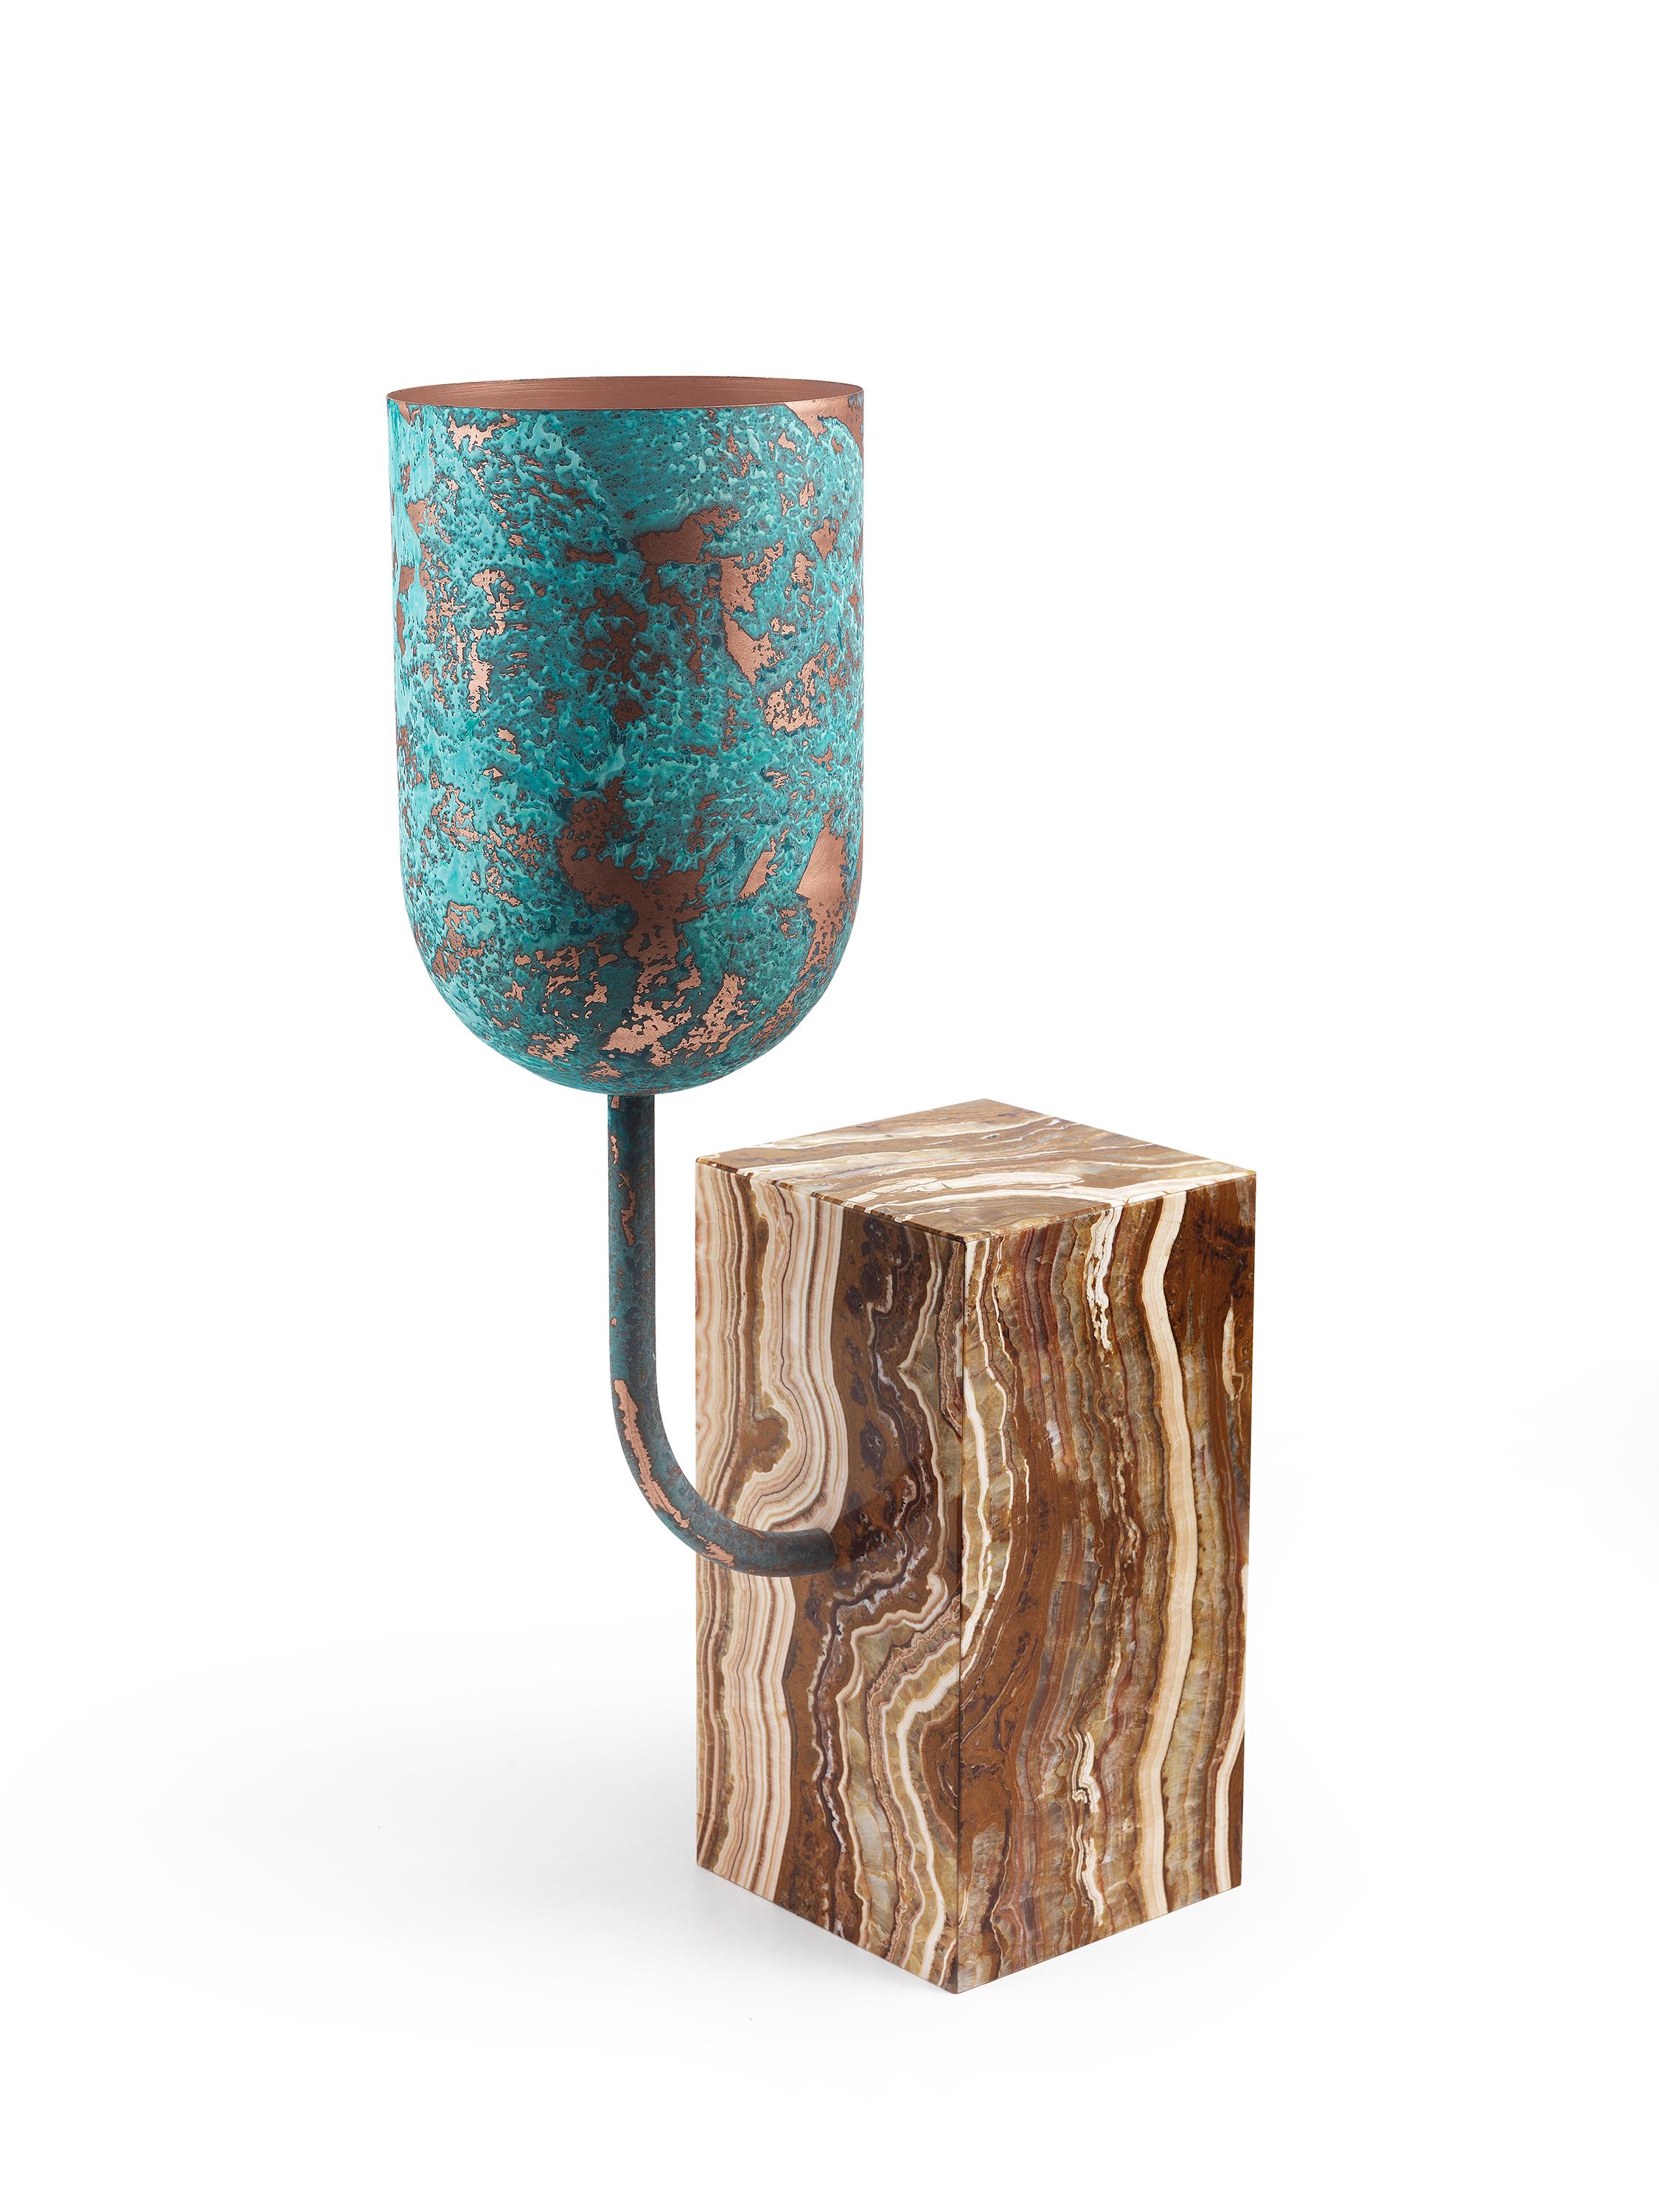 Aboram tall vase by Sam Baron
Materials: Base in marble (Onice sultano, Dolce Vita or Irish Green), body in natural copper or with vert-de-gris finish.
Dimensions: 70cm x 30cm x 18cm

From a geometric sharply cut block of exquisite stone comes